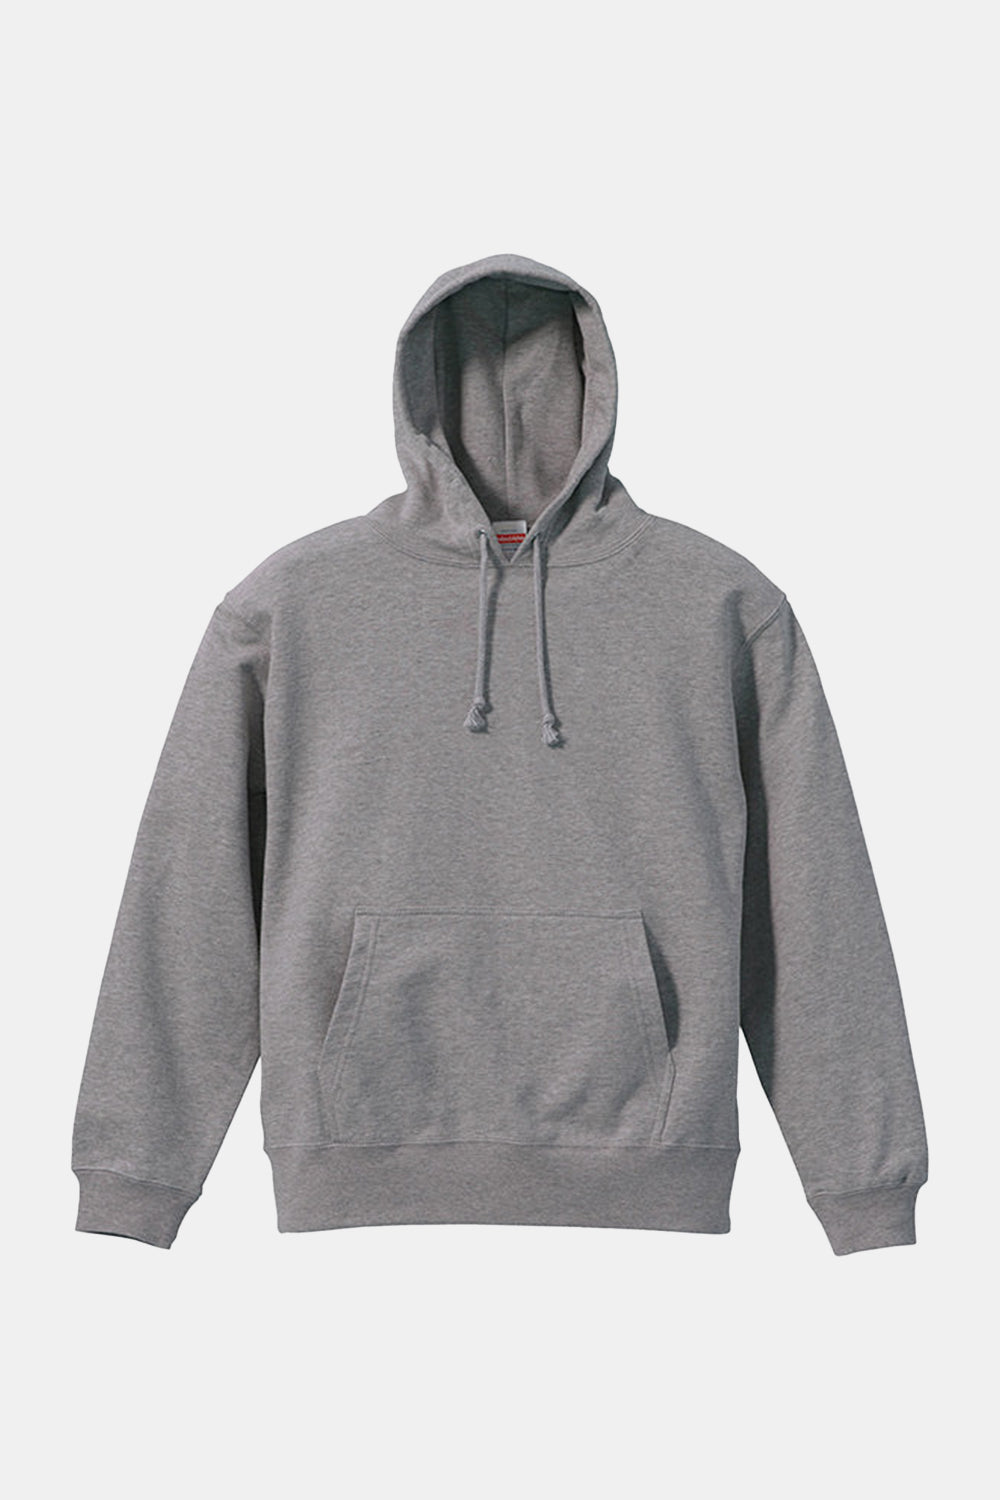 United Athle 5214 10.0oz Sweat Pullover Hoodie (Mix Grey)